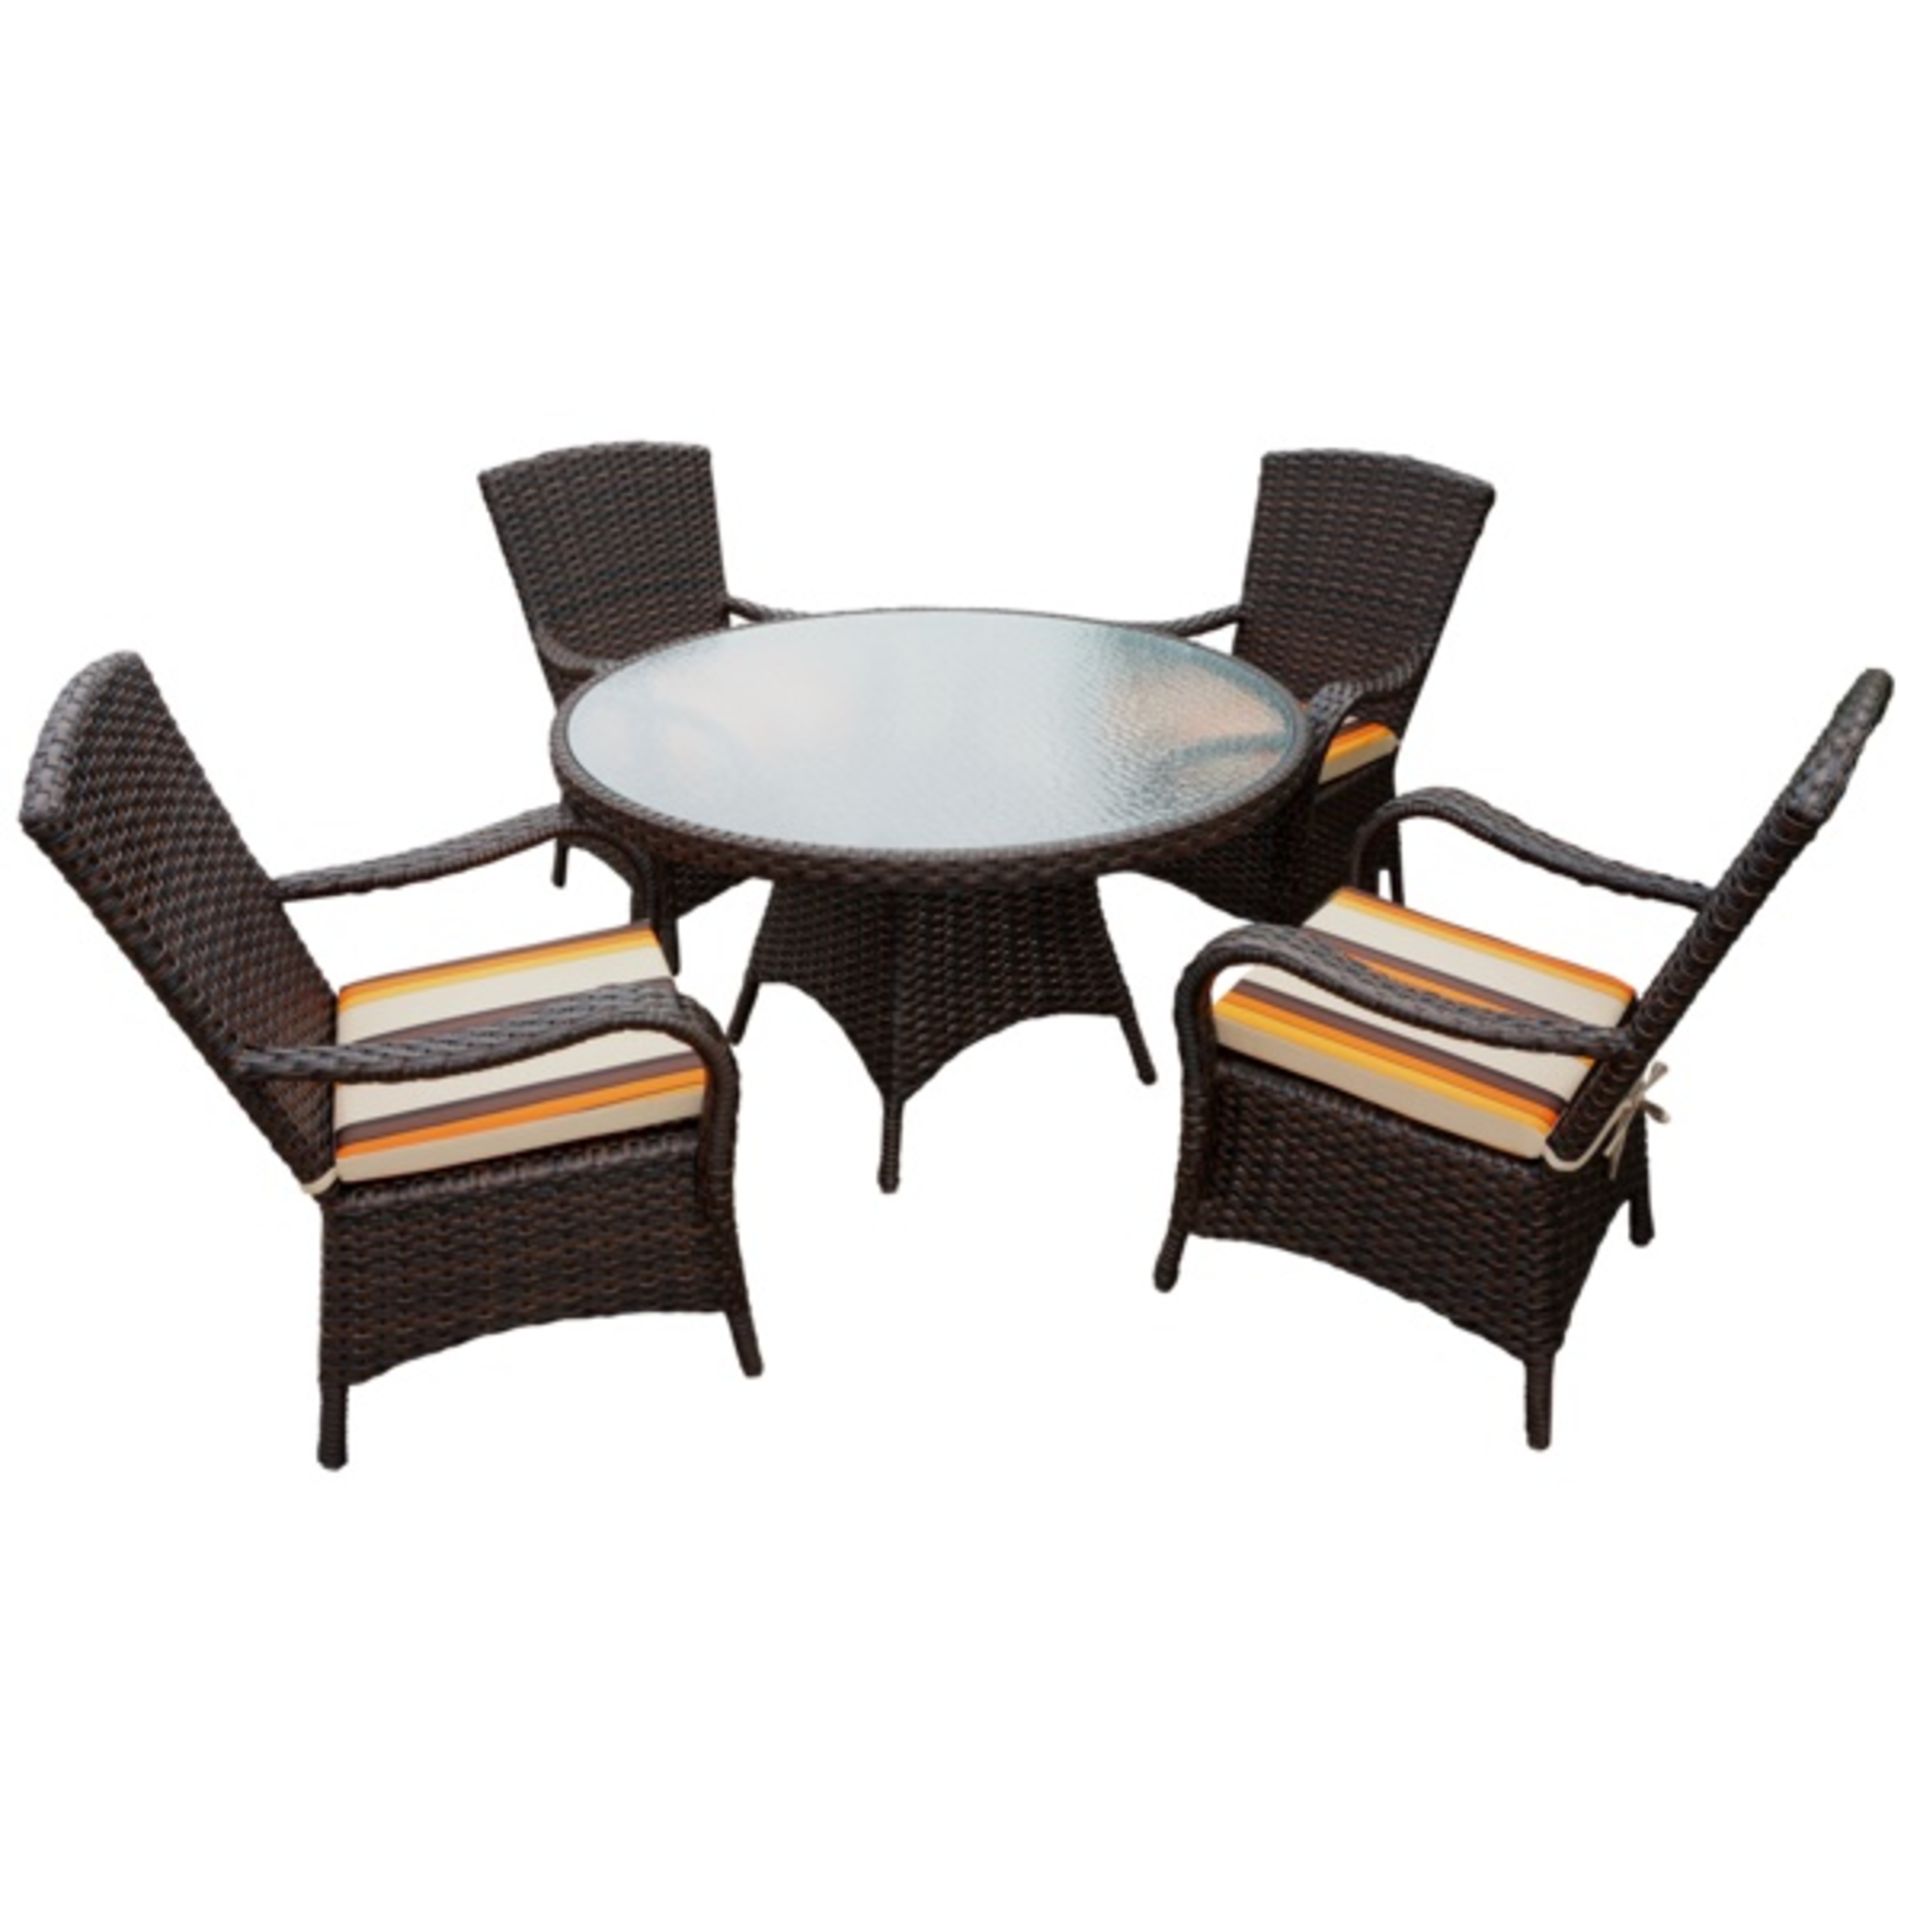 V Brand New BROWN RATTAN ROUND 120CM TABLE SET WITH 4 CHAIRS & LUXURY OUTDOOR PERFORMANCE CUSHIONS